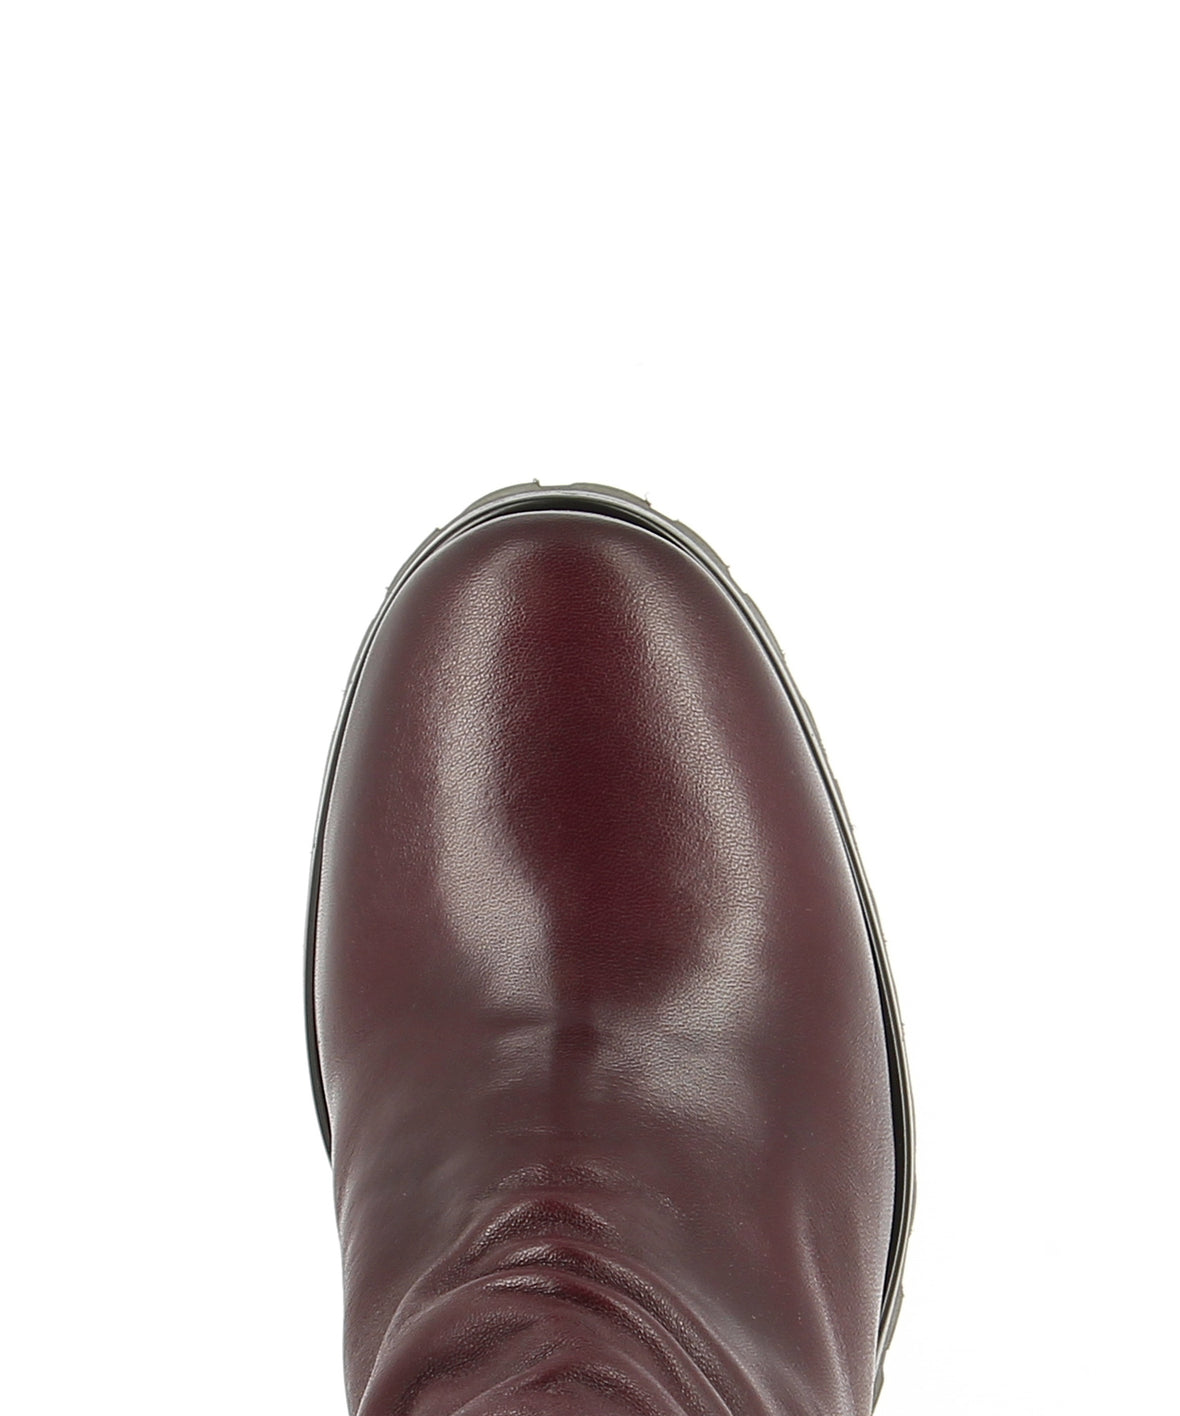 mulberry chelsea boots